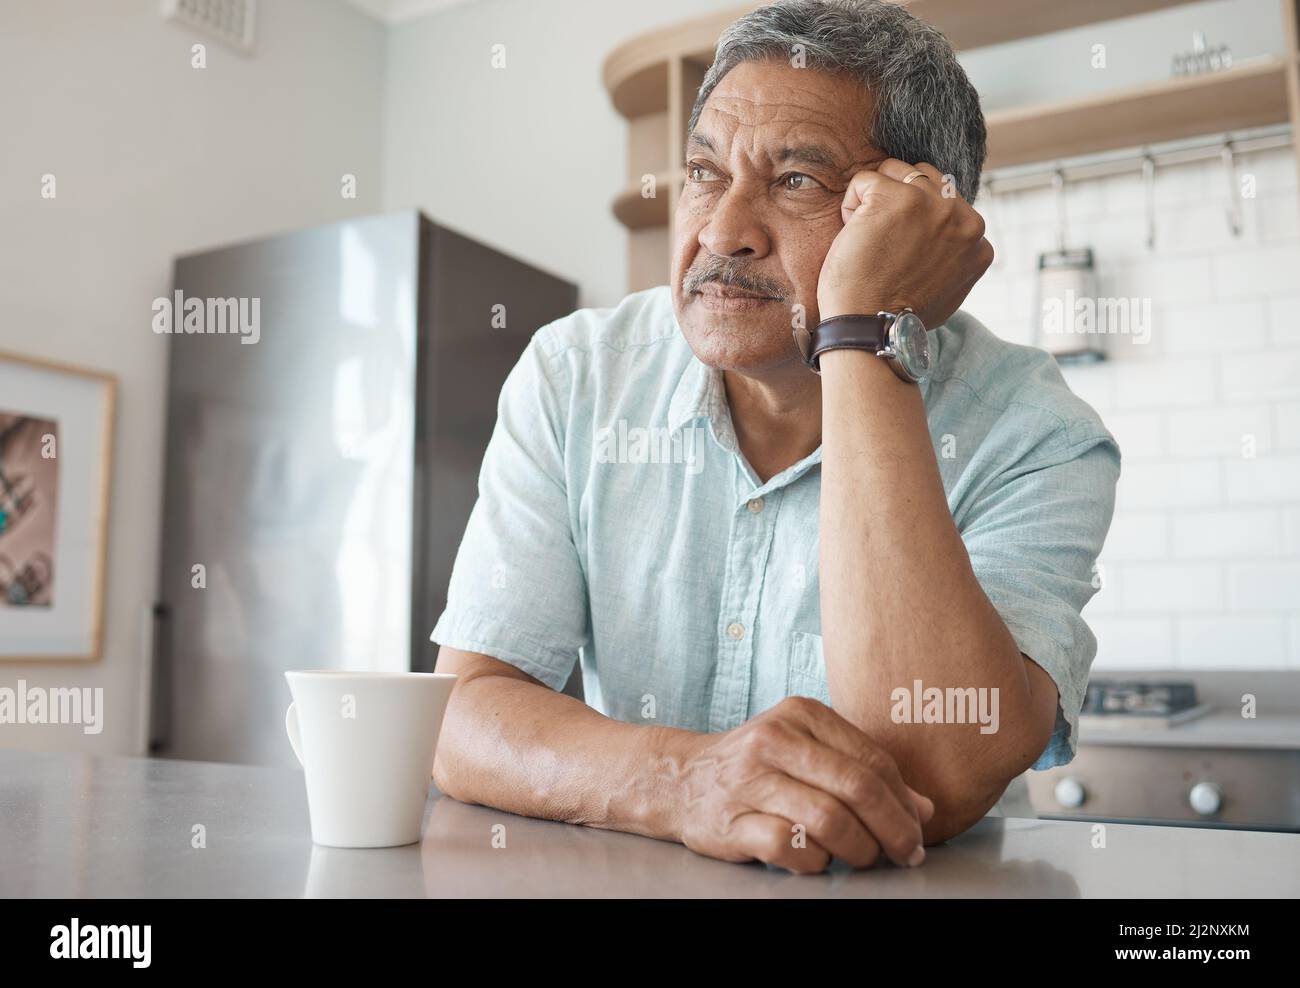 Being alone gets lonely. Shot of a senior man looking pensive while drinking coffee at home. Stock Photo